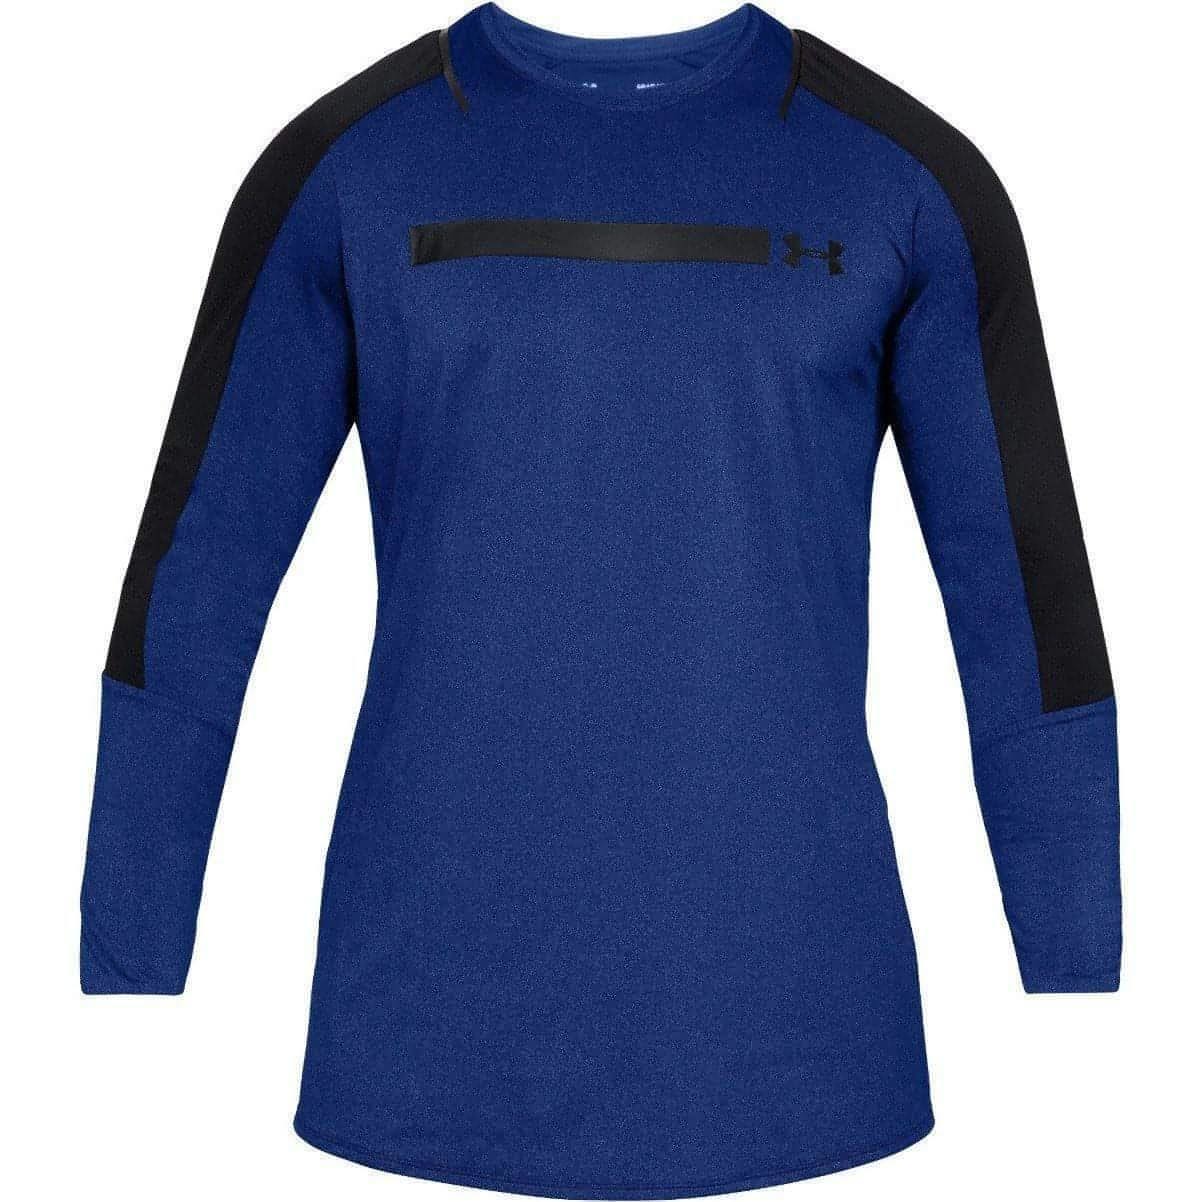 Under Armour Perpetual Fitted Long Sleeve Mens Training Top - Blue - Start Fitness